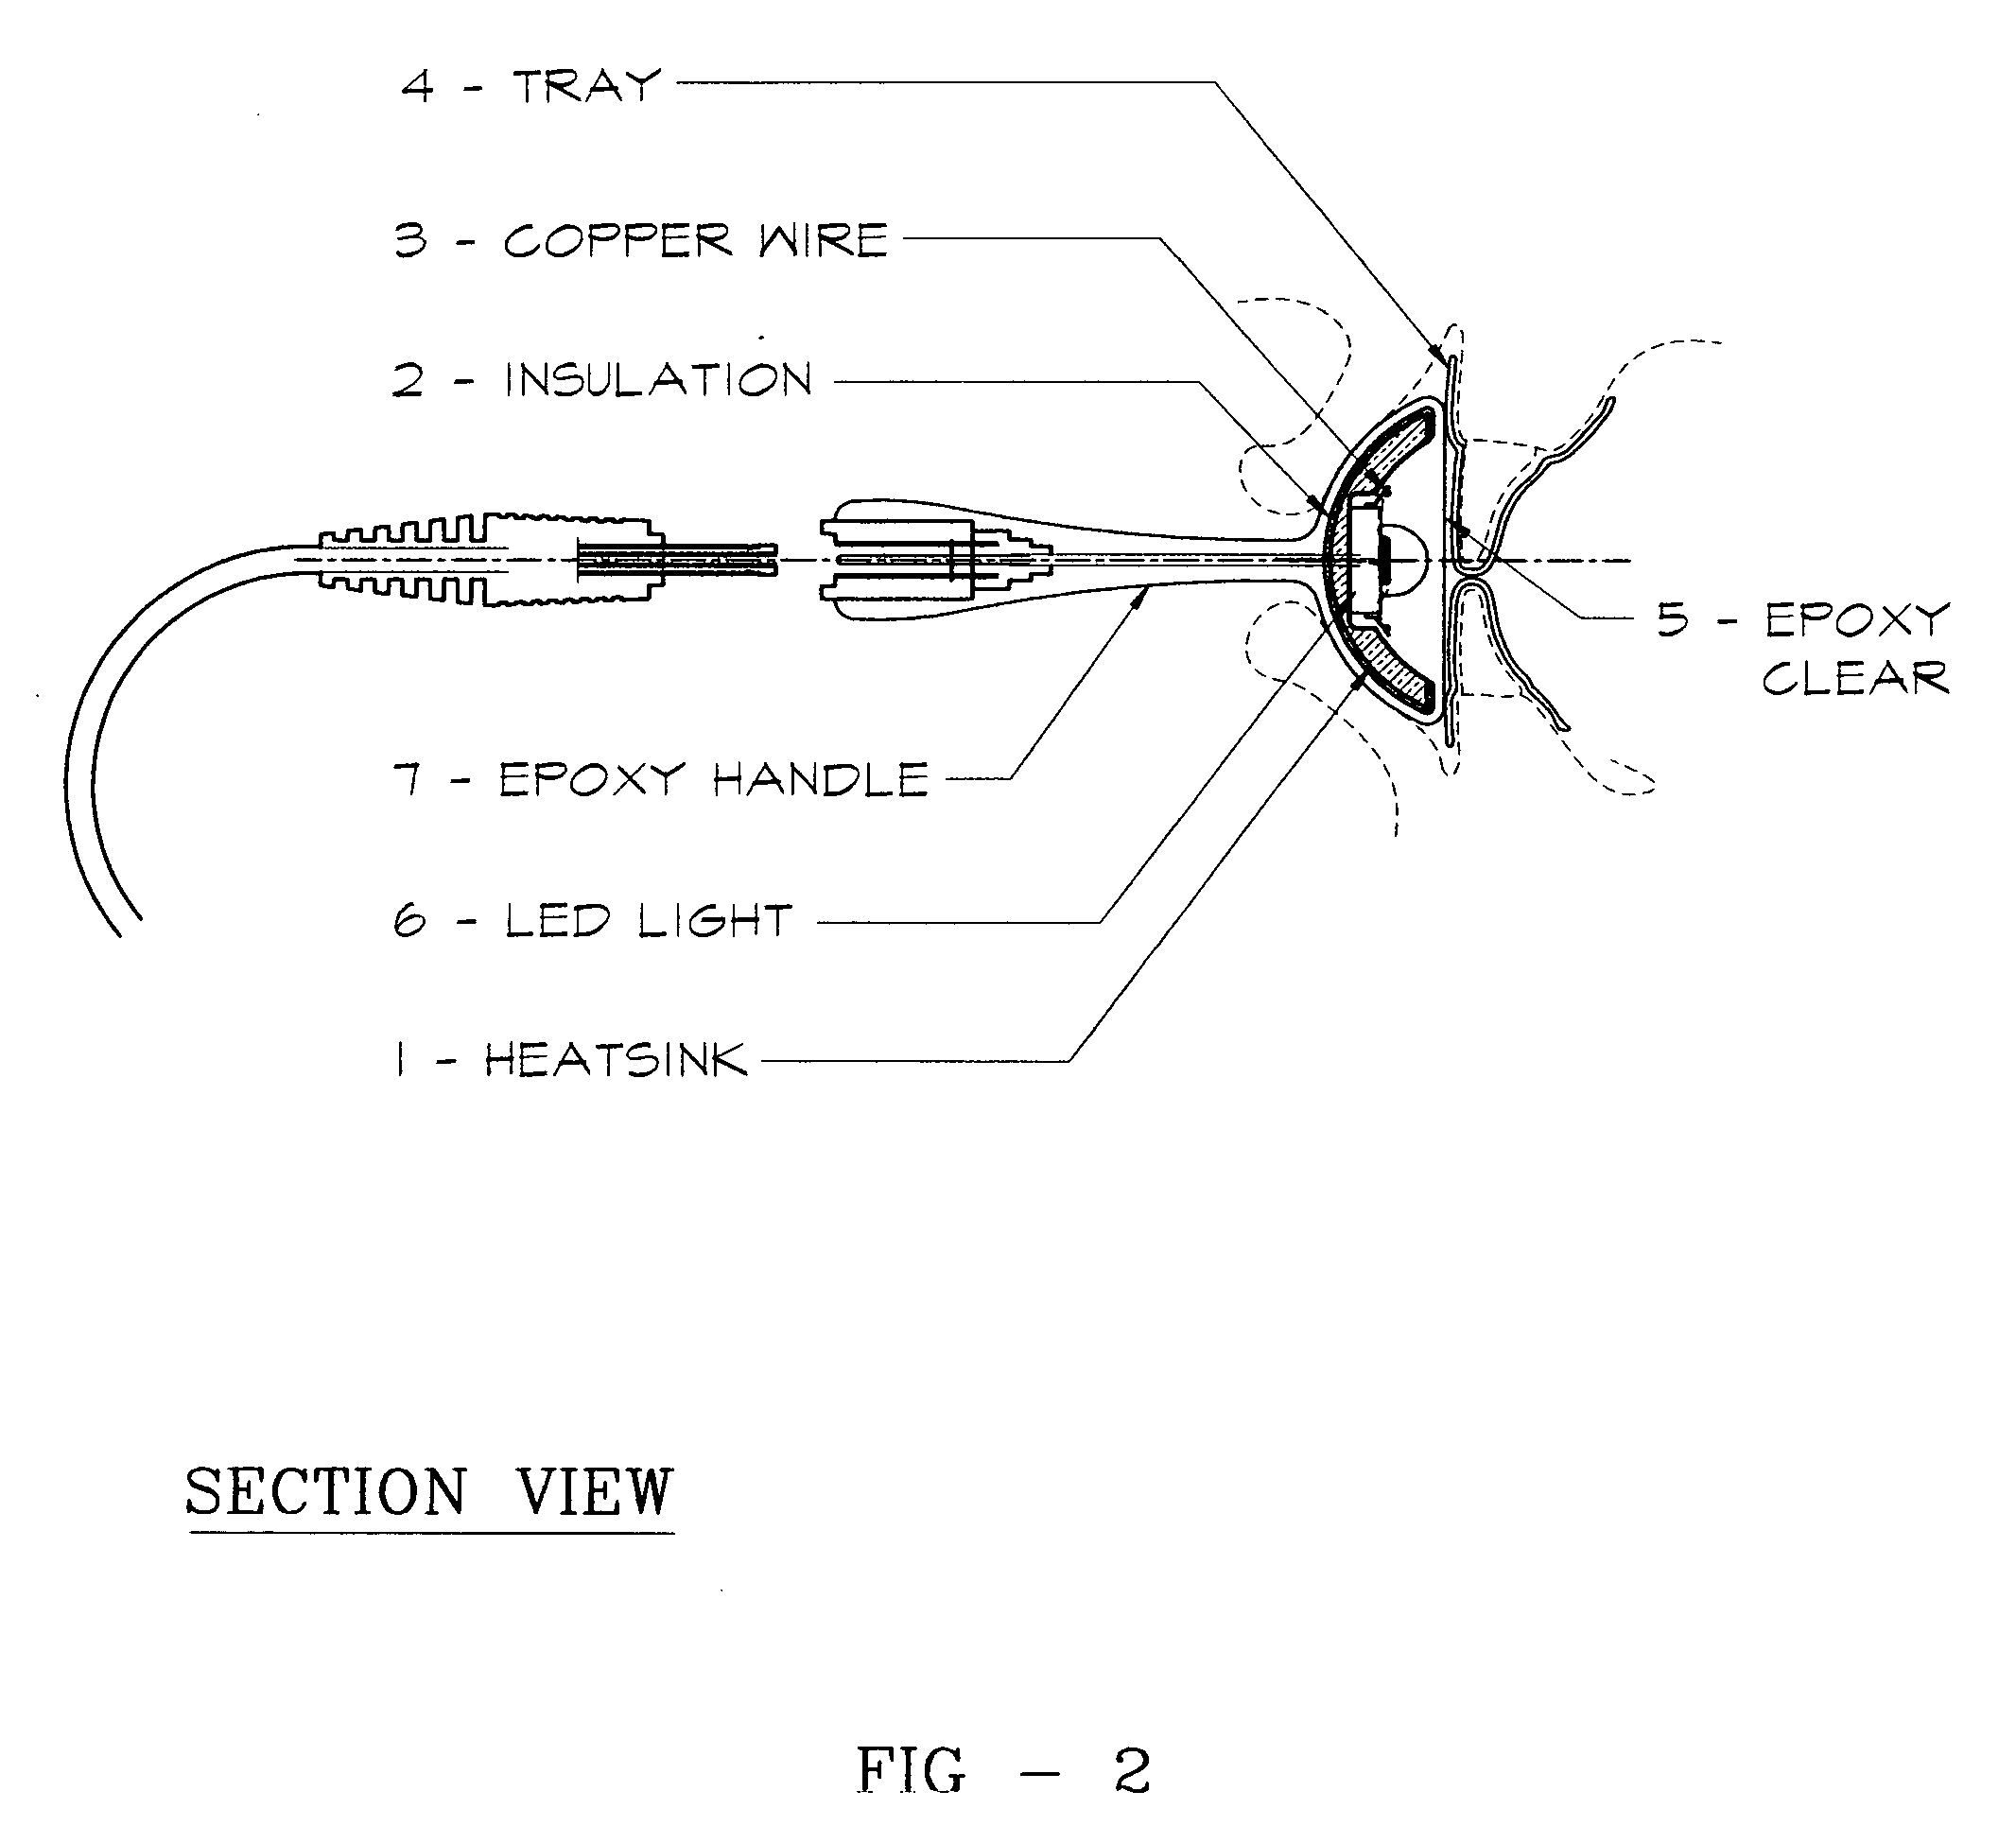 Tooth whitening apparatus and methods for whitening teeth using an intra-oral light generating device